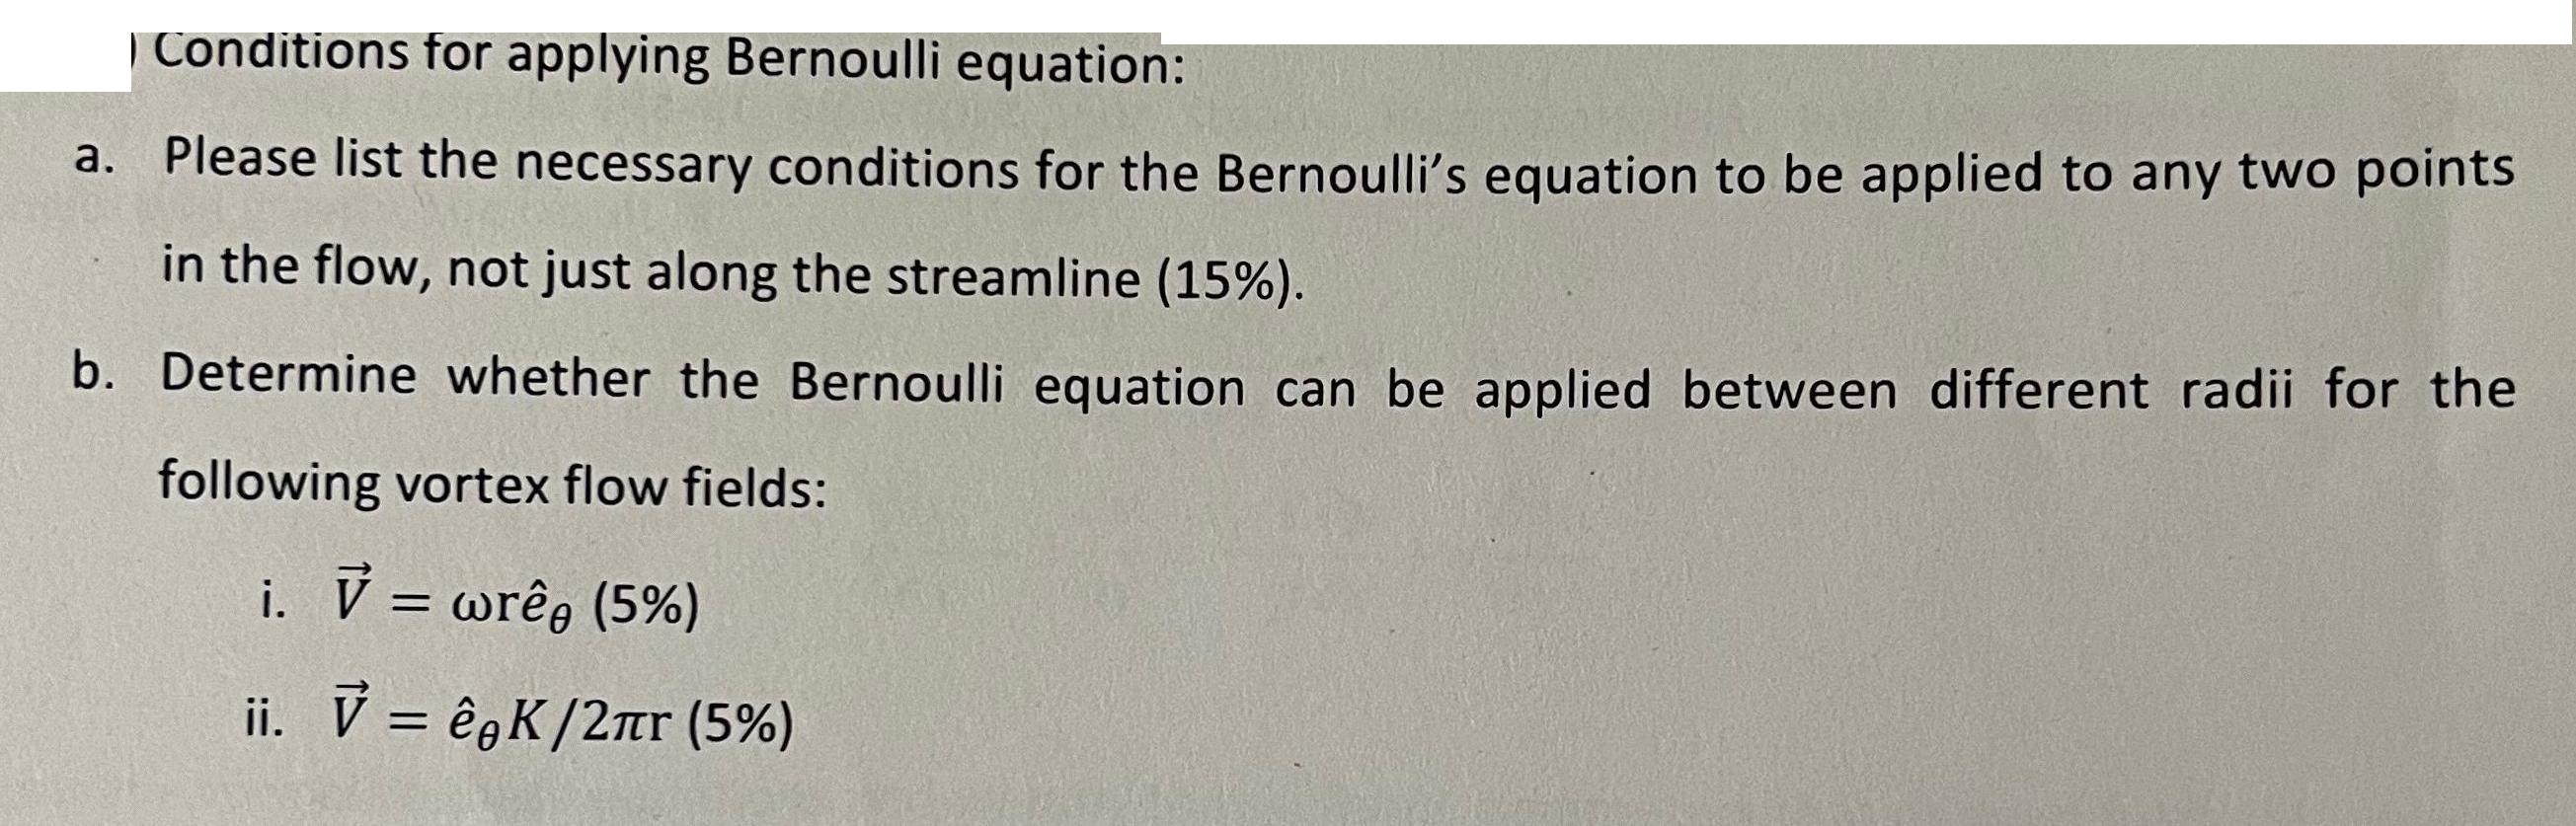 Conditions for applying Bernoulli equation: a. Please list the necessary conditions for the Bernoulli's